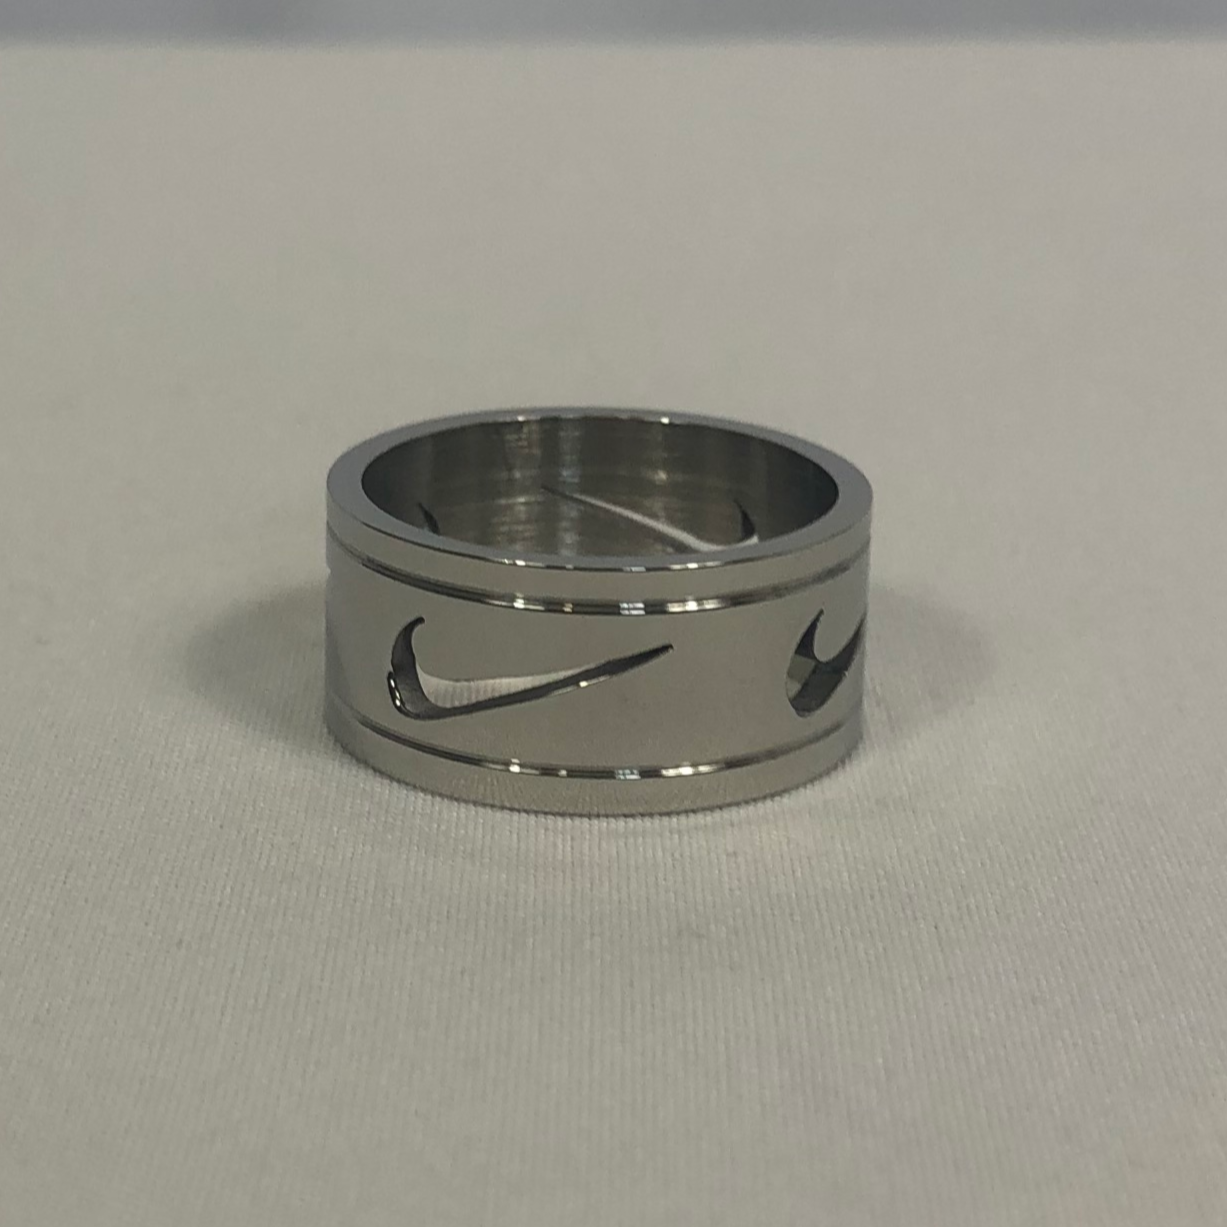 Swoosh Band Cutout Ring in Silver